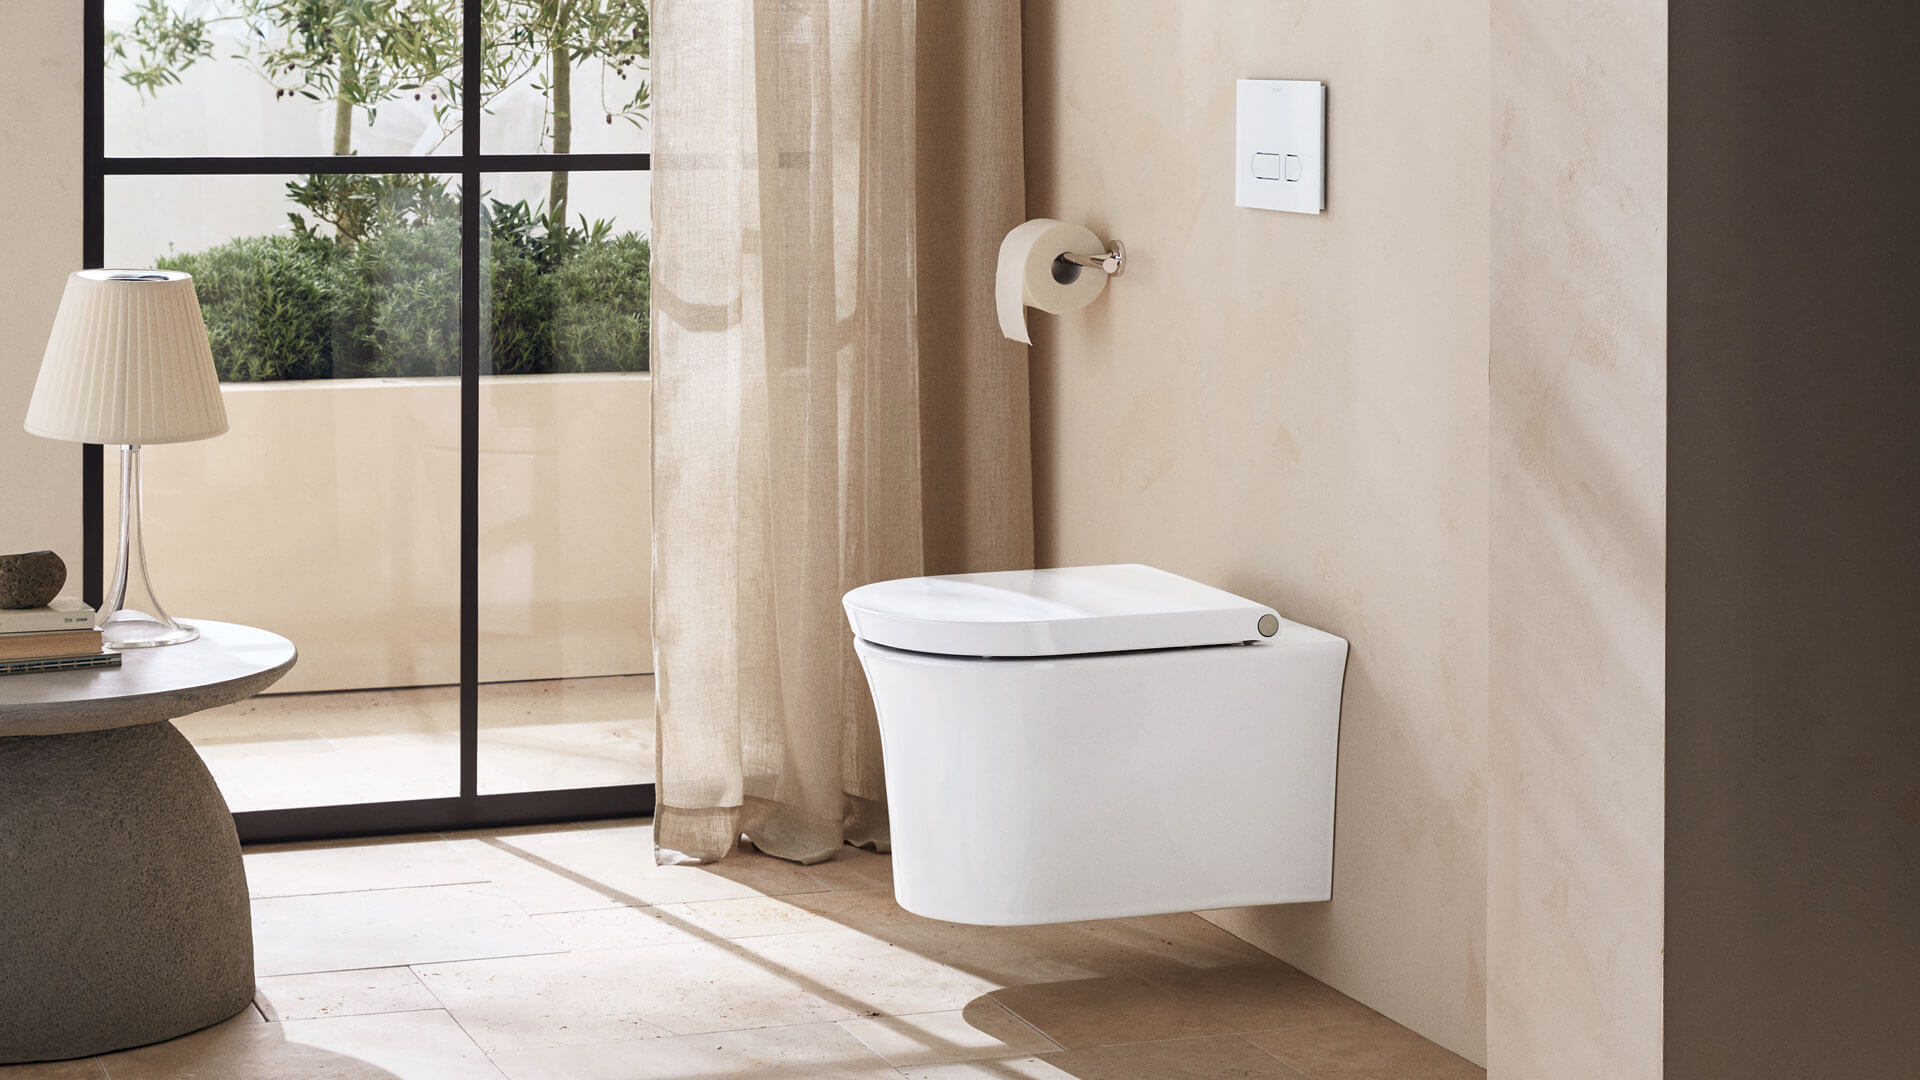 Wall hung WhiteTulip toilet including seat with soft close mechanism
